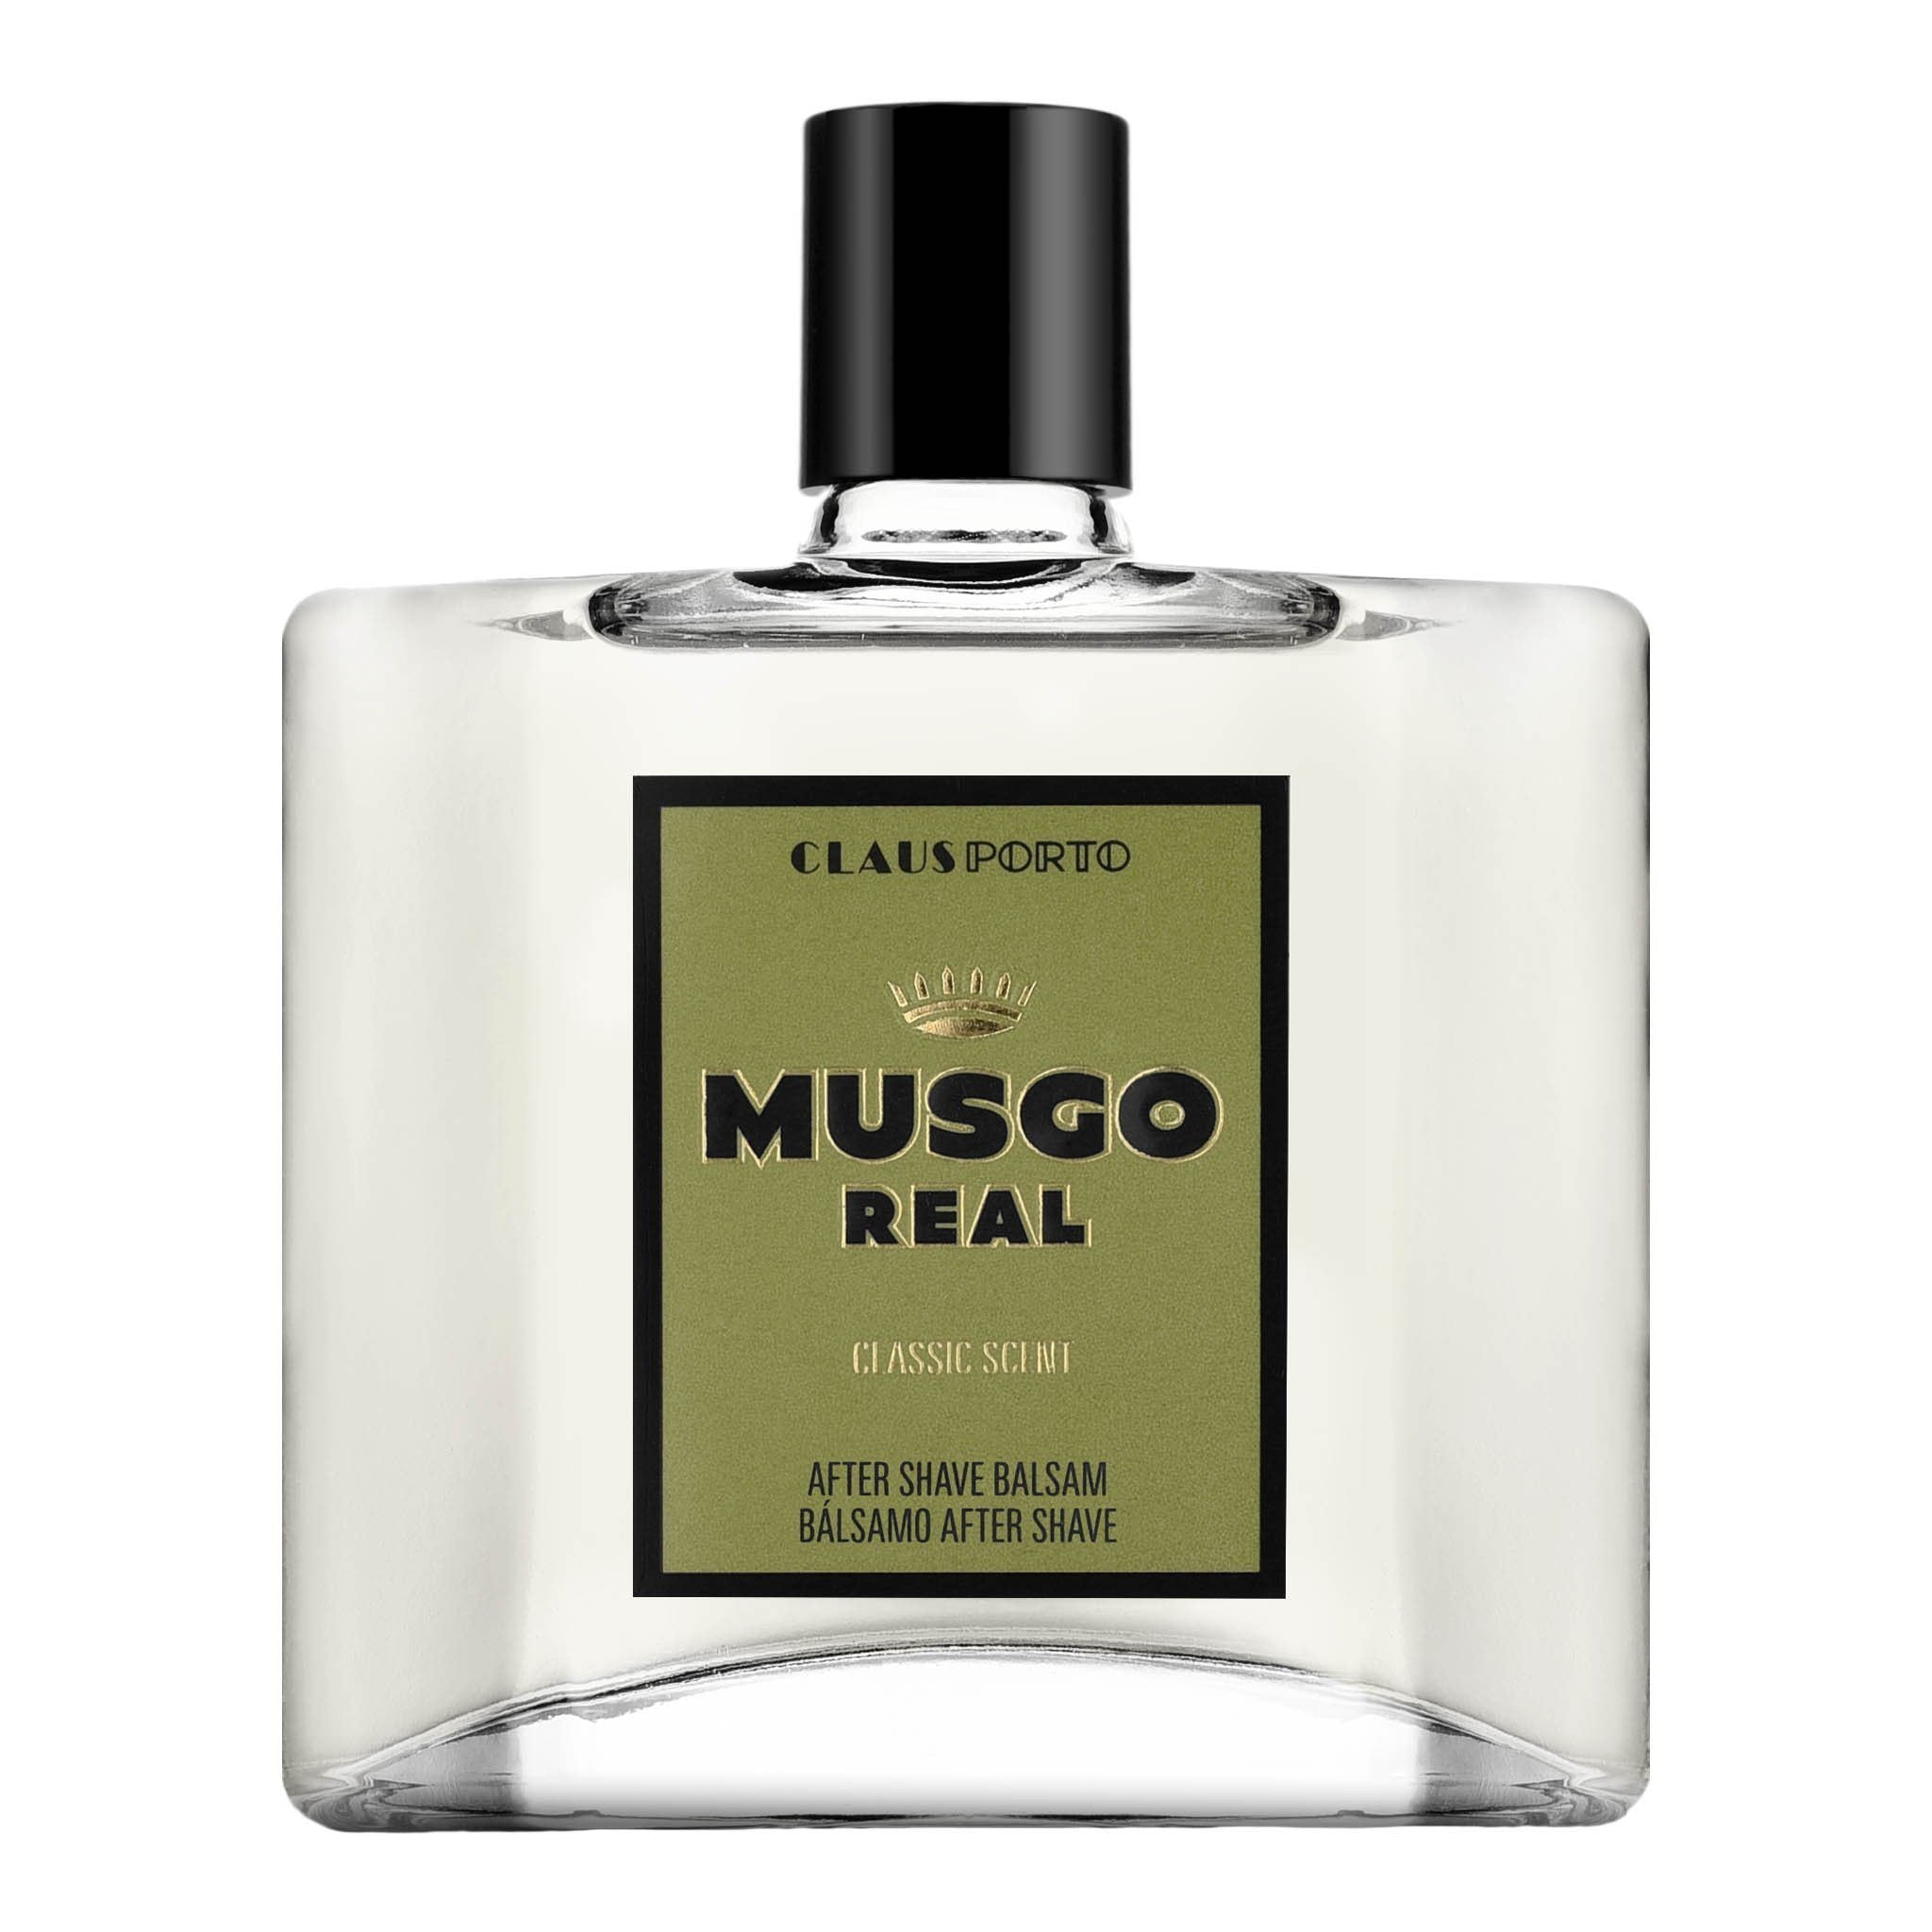 Musgo Real After Shave Balsam